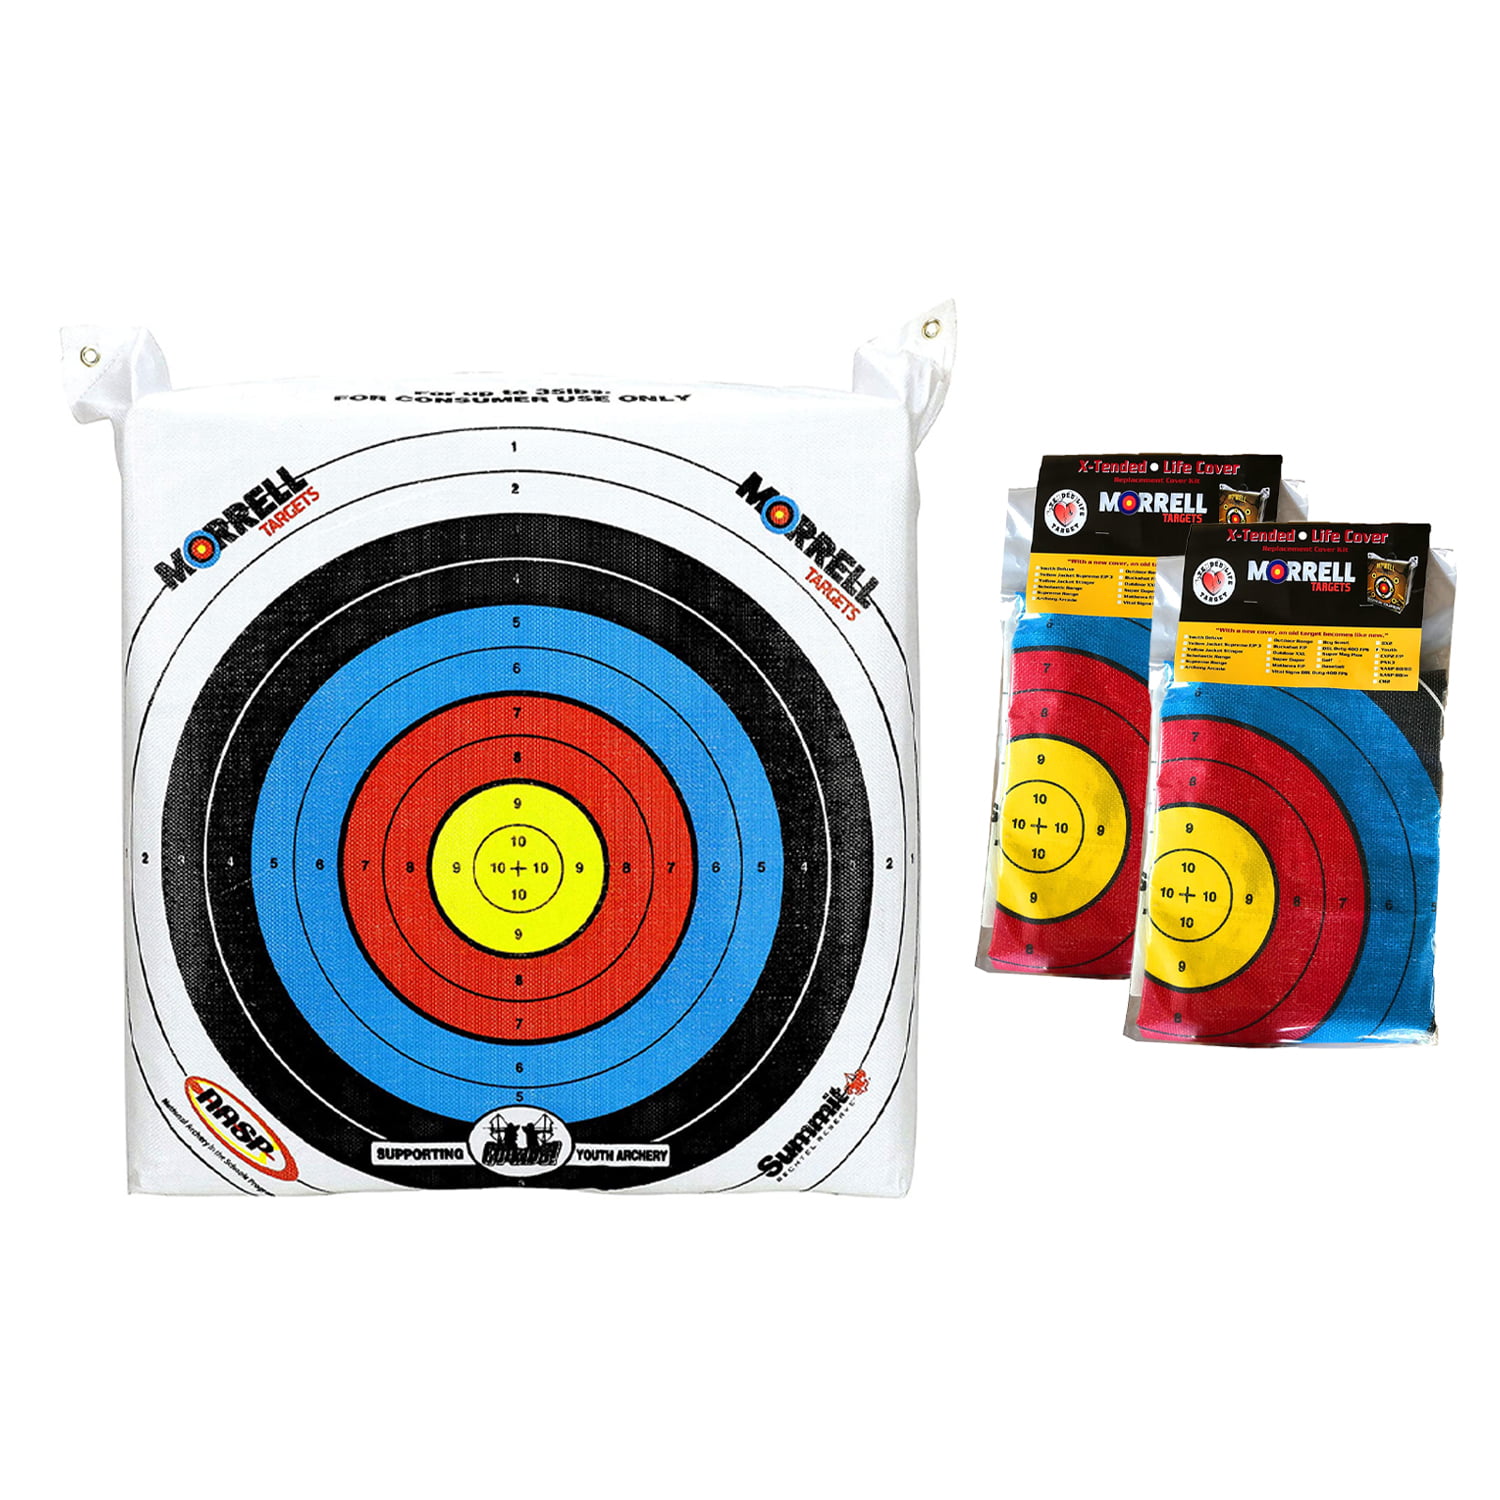 Morrell Outdoor Portable Youth Kids Range NASP Field Point Archery Bag Target with 2 Sides and 4 Shooting Spots and Replacement Cover 